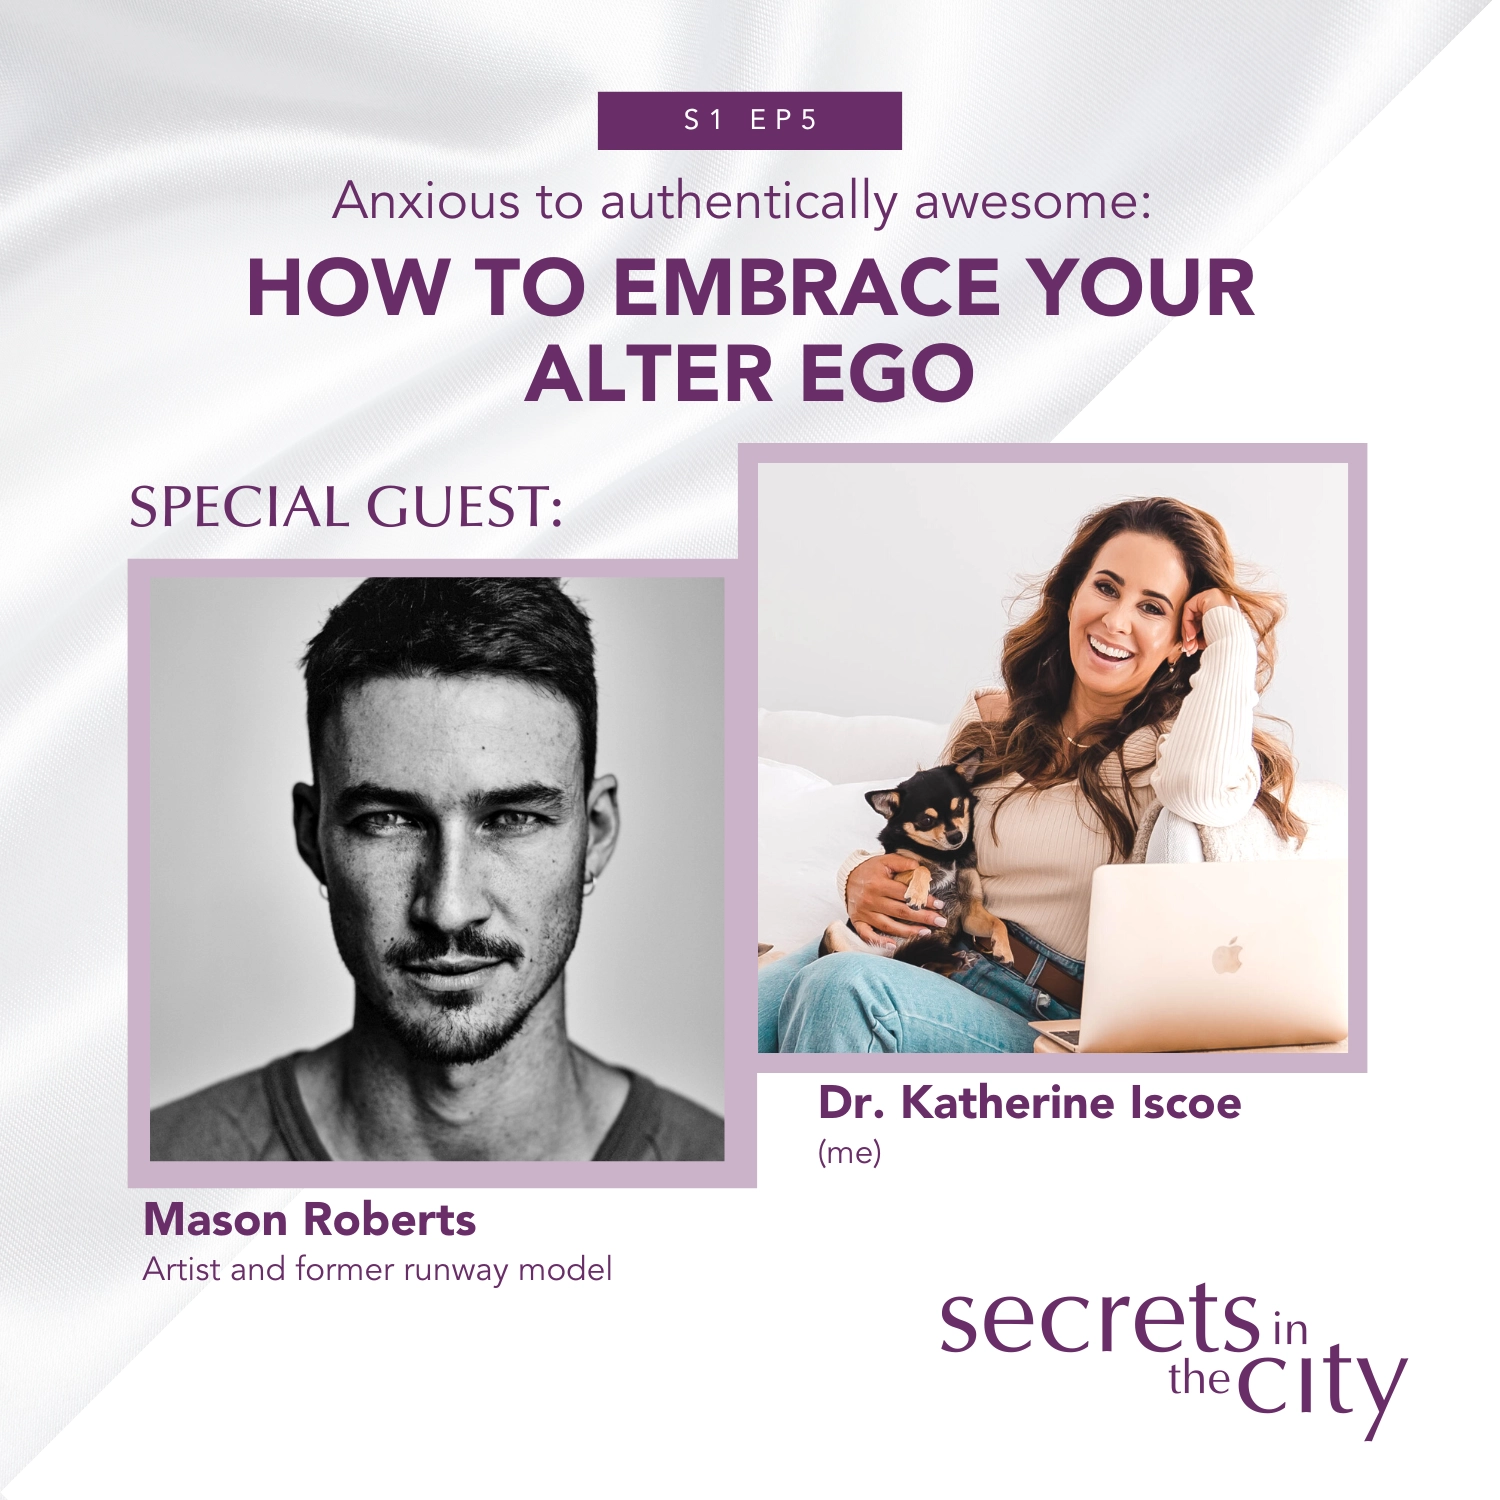 Secrets in the City podcast cover featuring photos of Mason Roberts and Dr. Katherine Iscoe